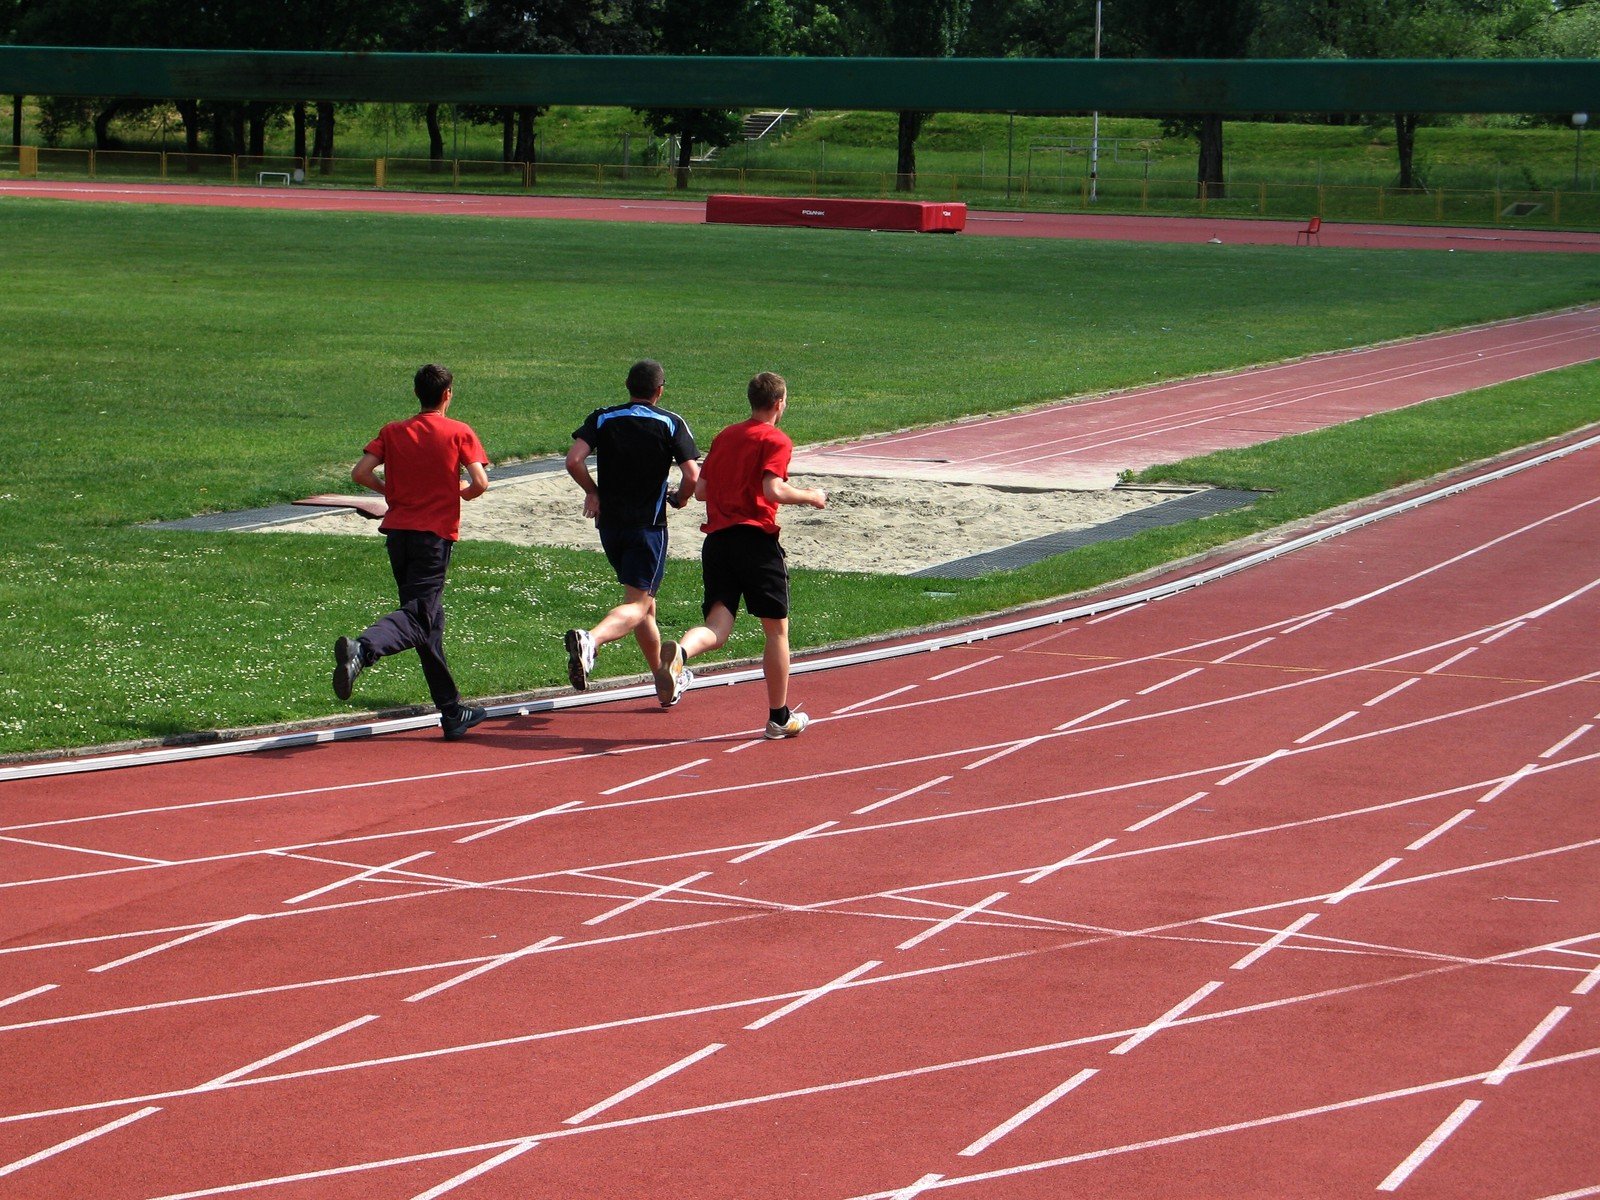 three people running a track next to a field